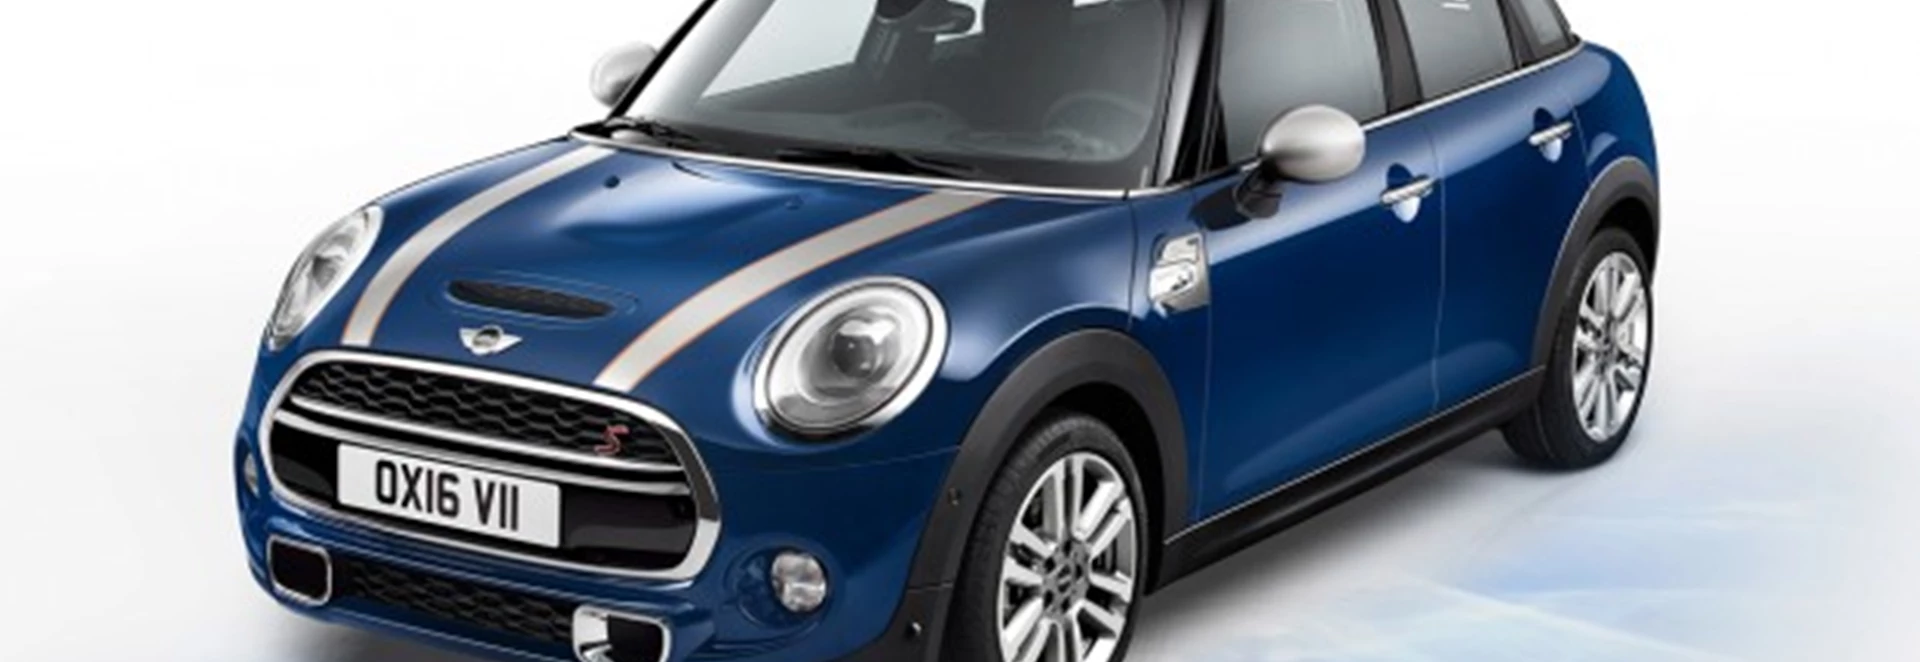 MINI’s special edition Seven pays tribute to the brand’s past